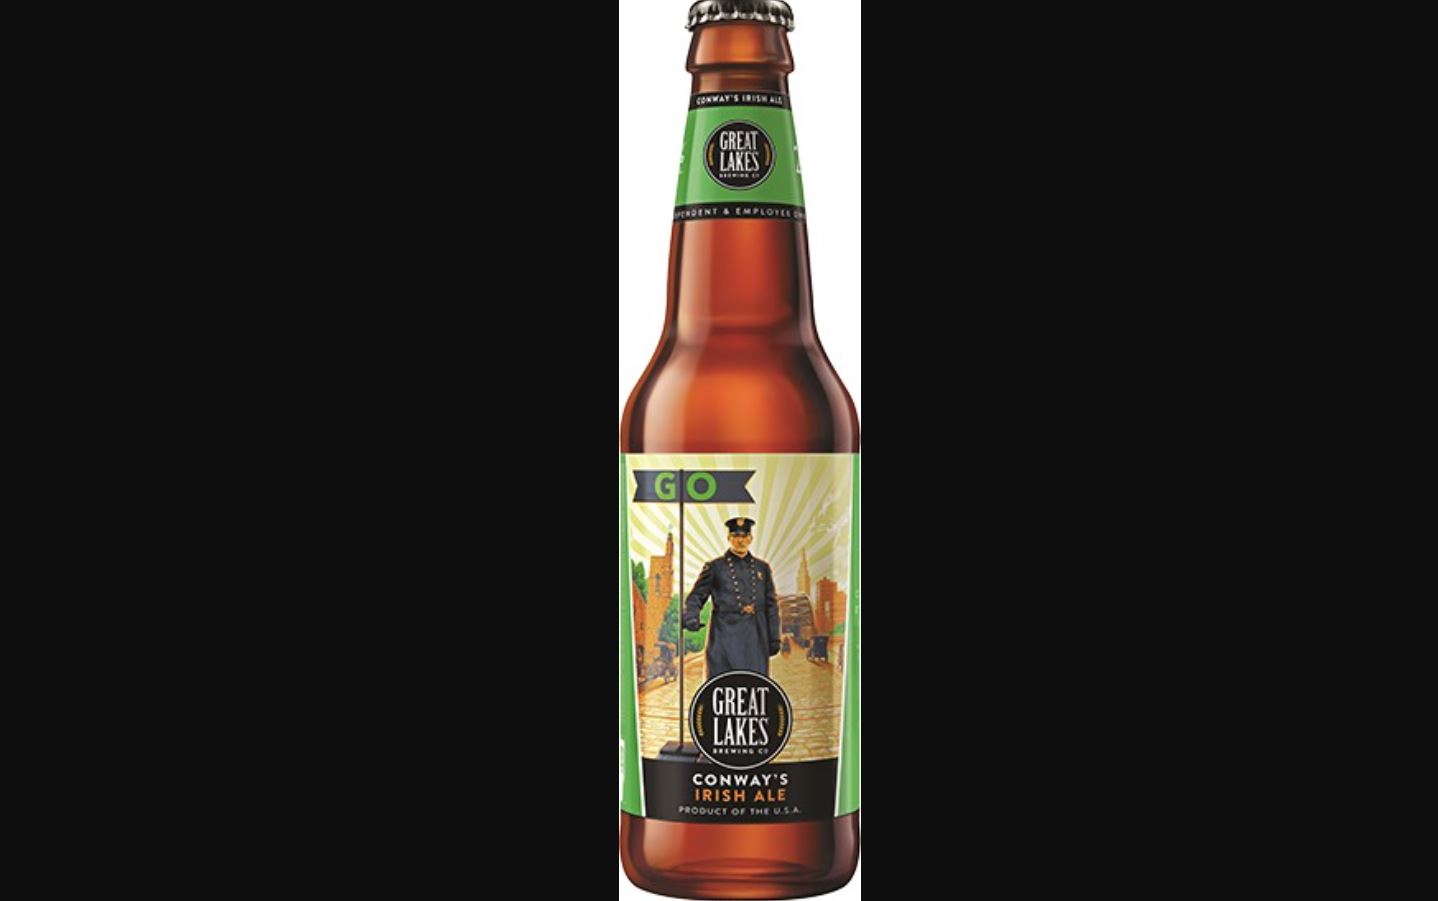 Great Lakes Conway’s Irish Ale